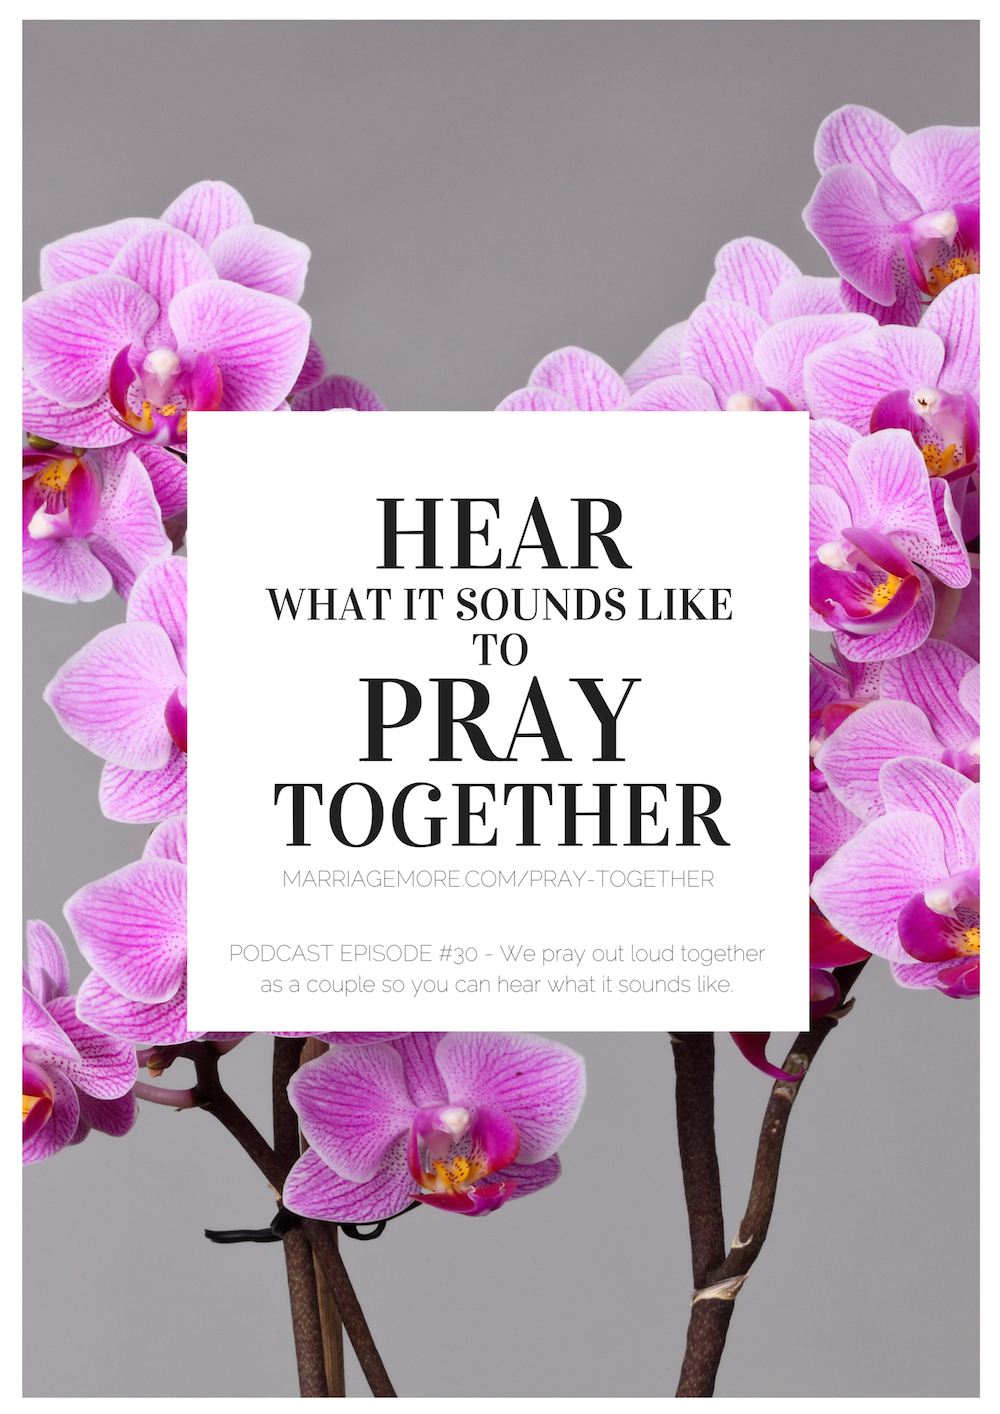 PRAY TOGETHER WITH YOUR SPOUSE by MARRIAGEMORE.COM